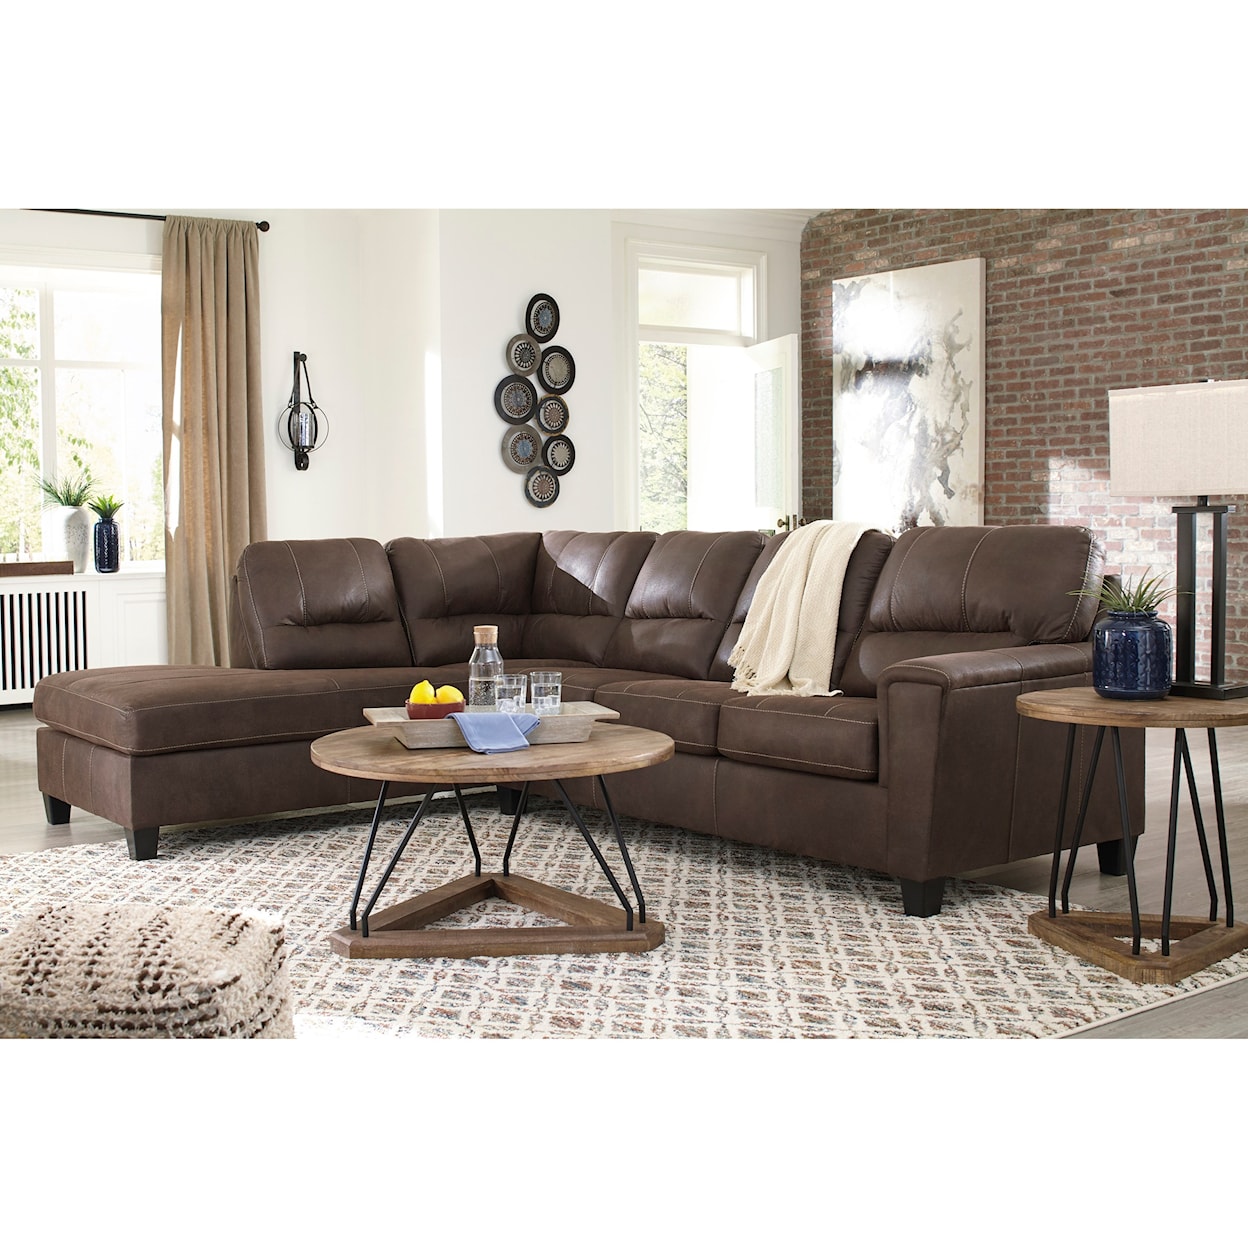 Benchcraft Navi 2-Piece Sectional w/ Left Chaise & Sleeper